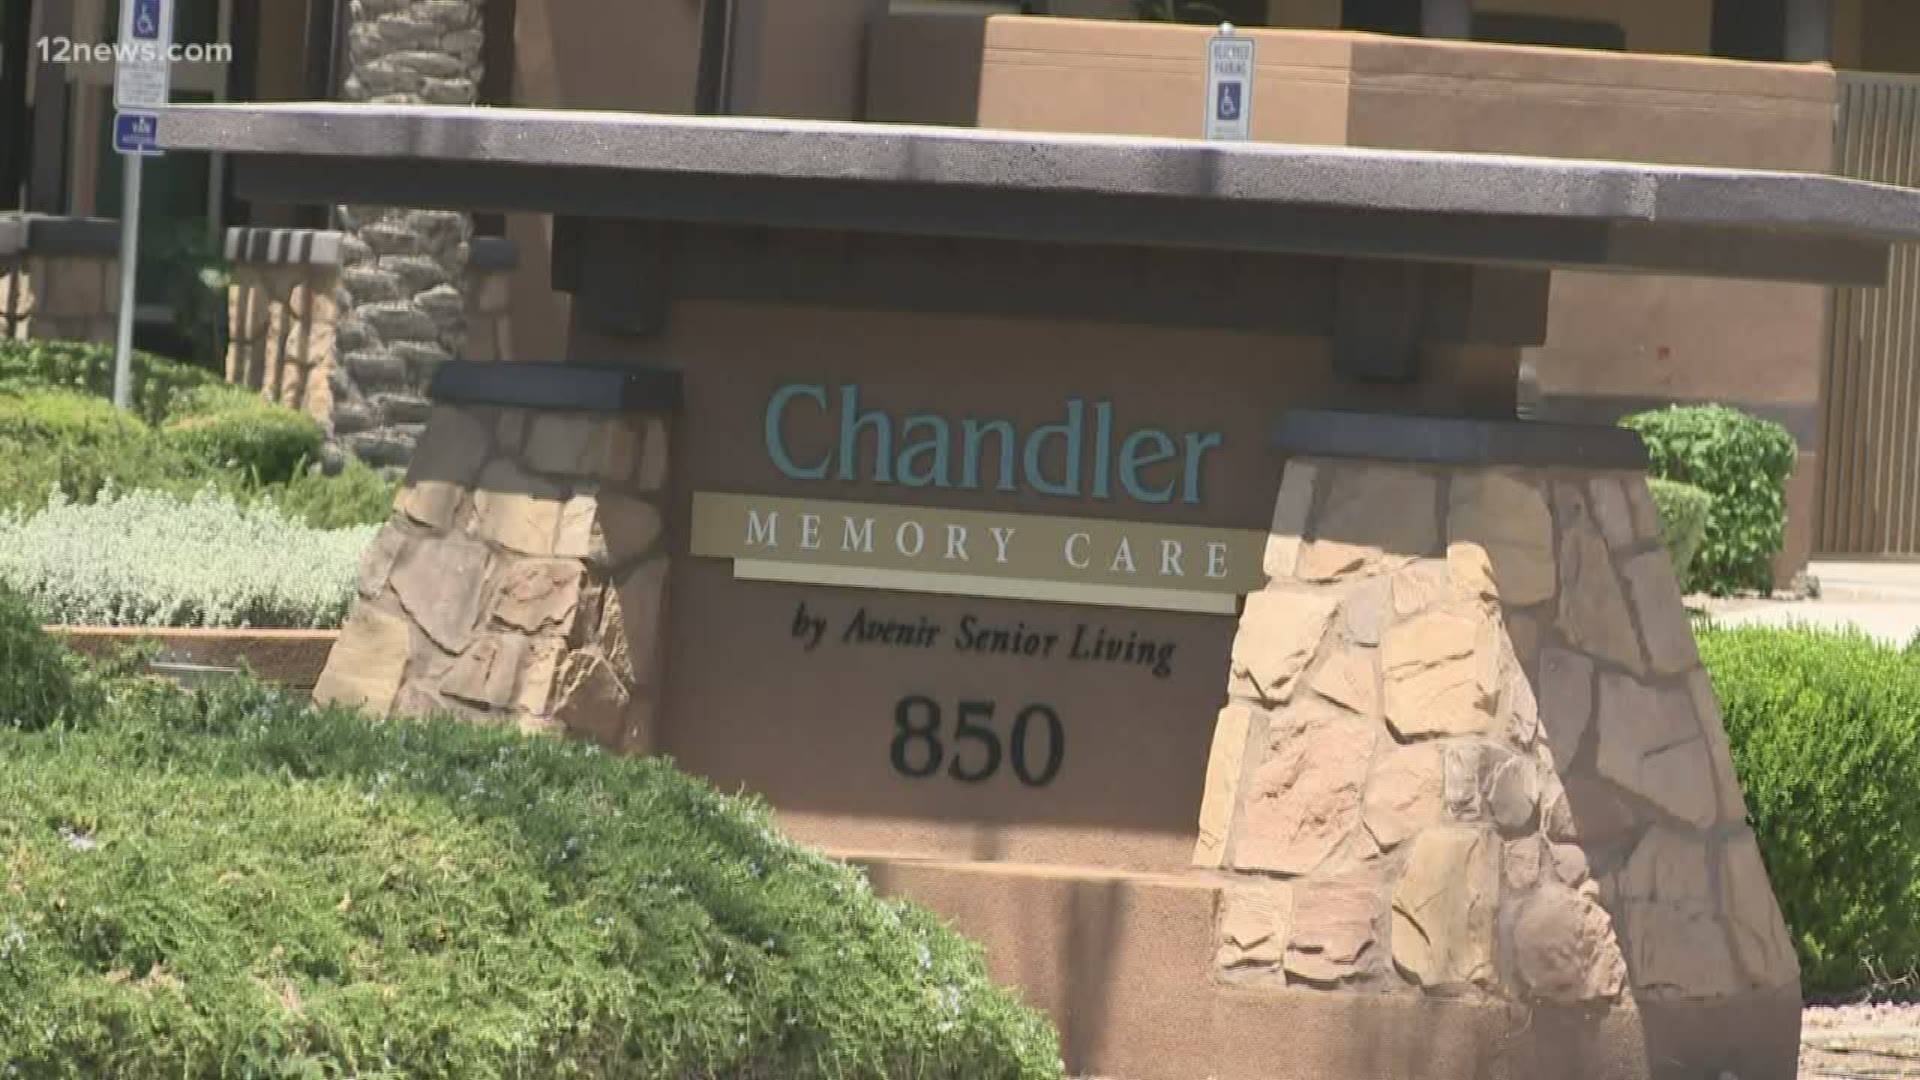 22 residents of a long-term care facility in Chandler have tested positive for coronavirus. Families are now worried about loved ones and the care they're getting.